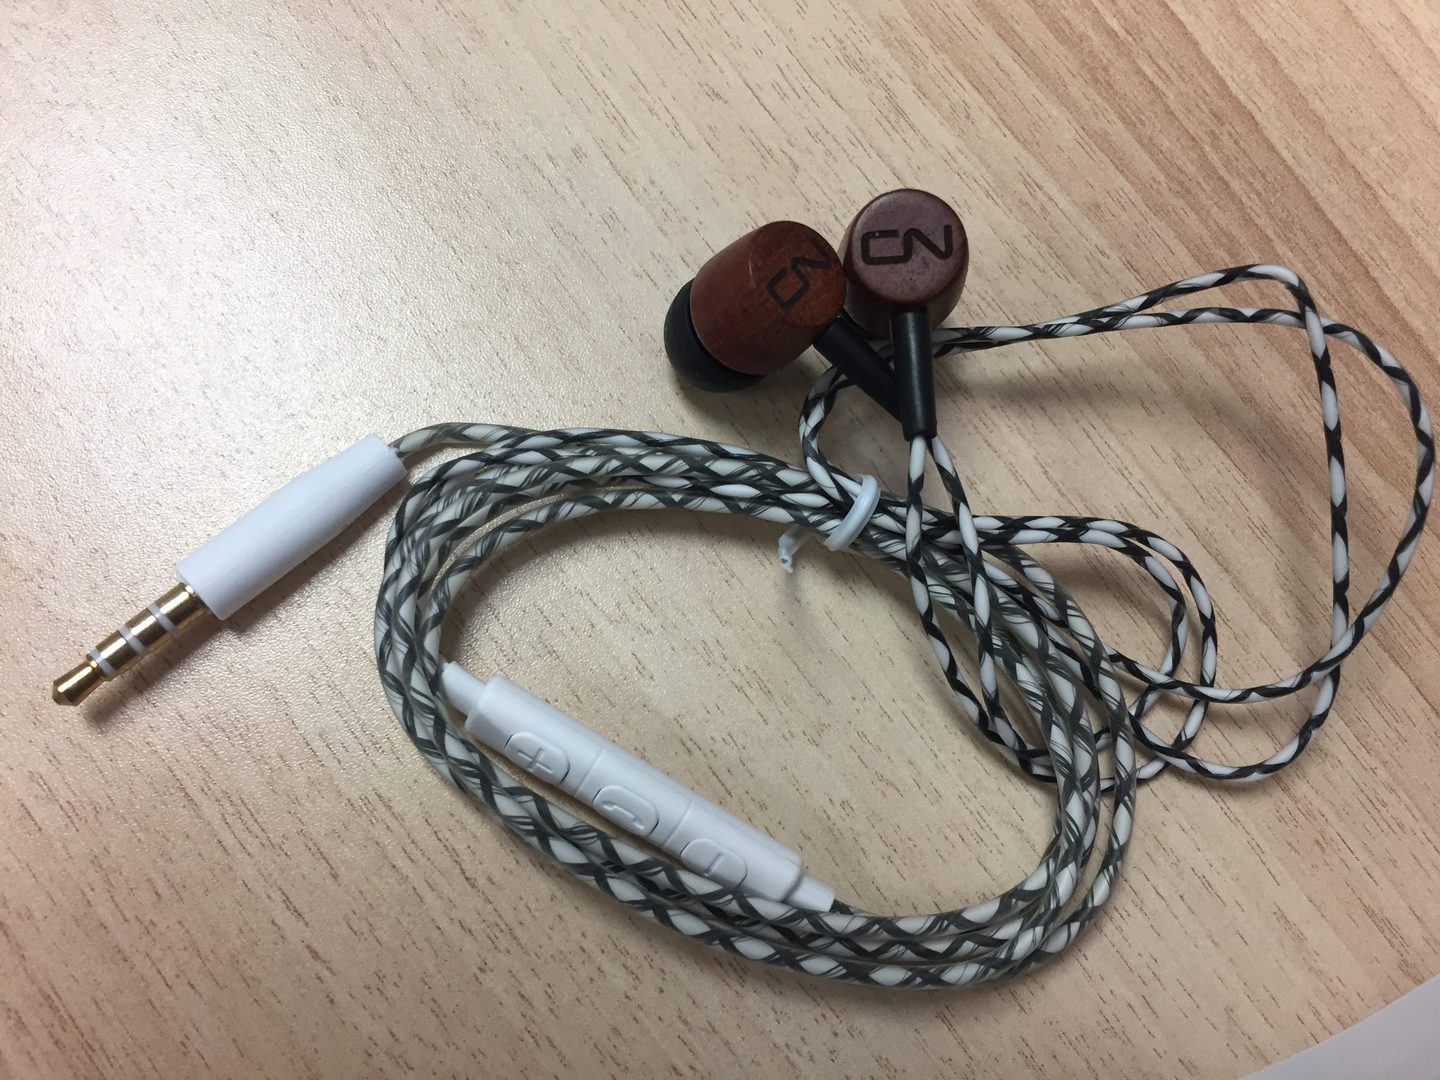 A Black and White Thread Cover Headphones Bunch